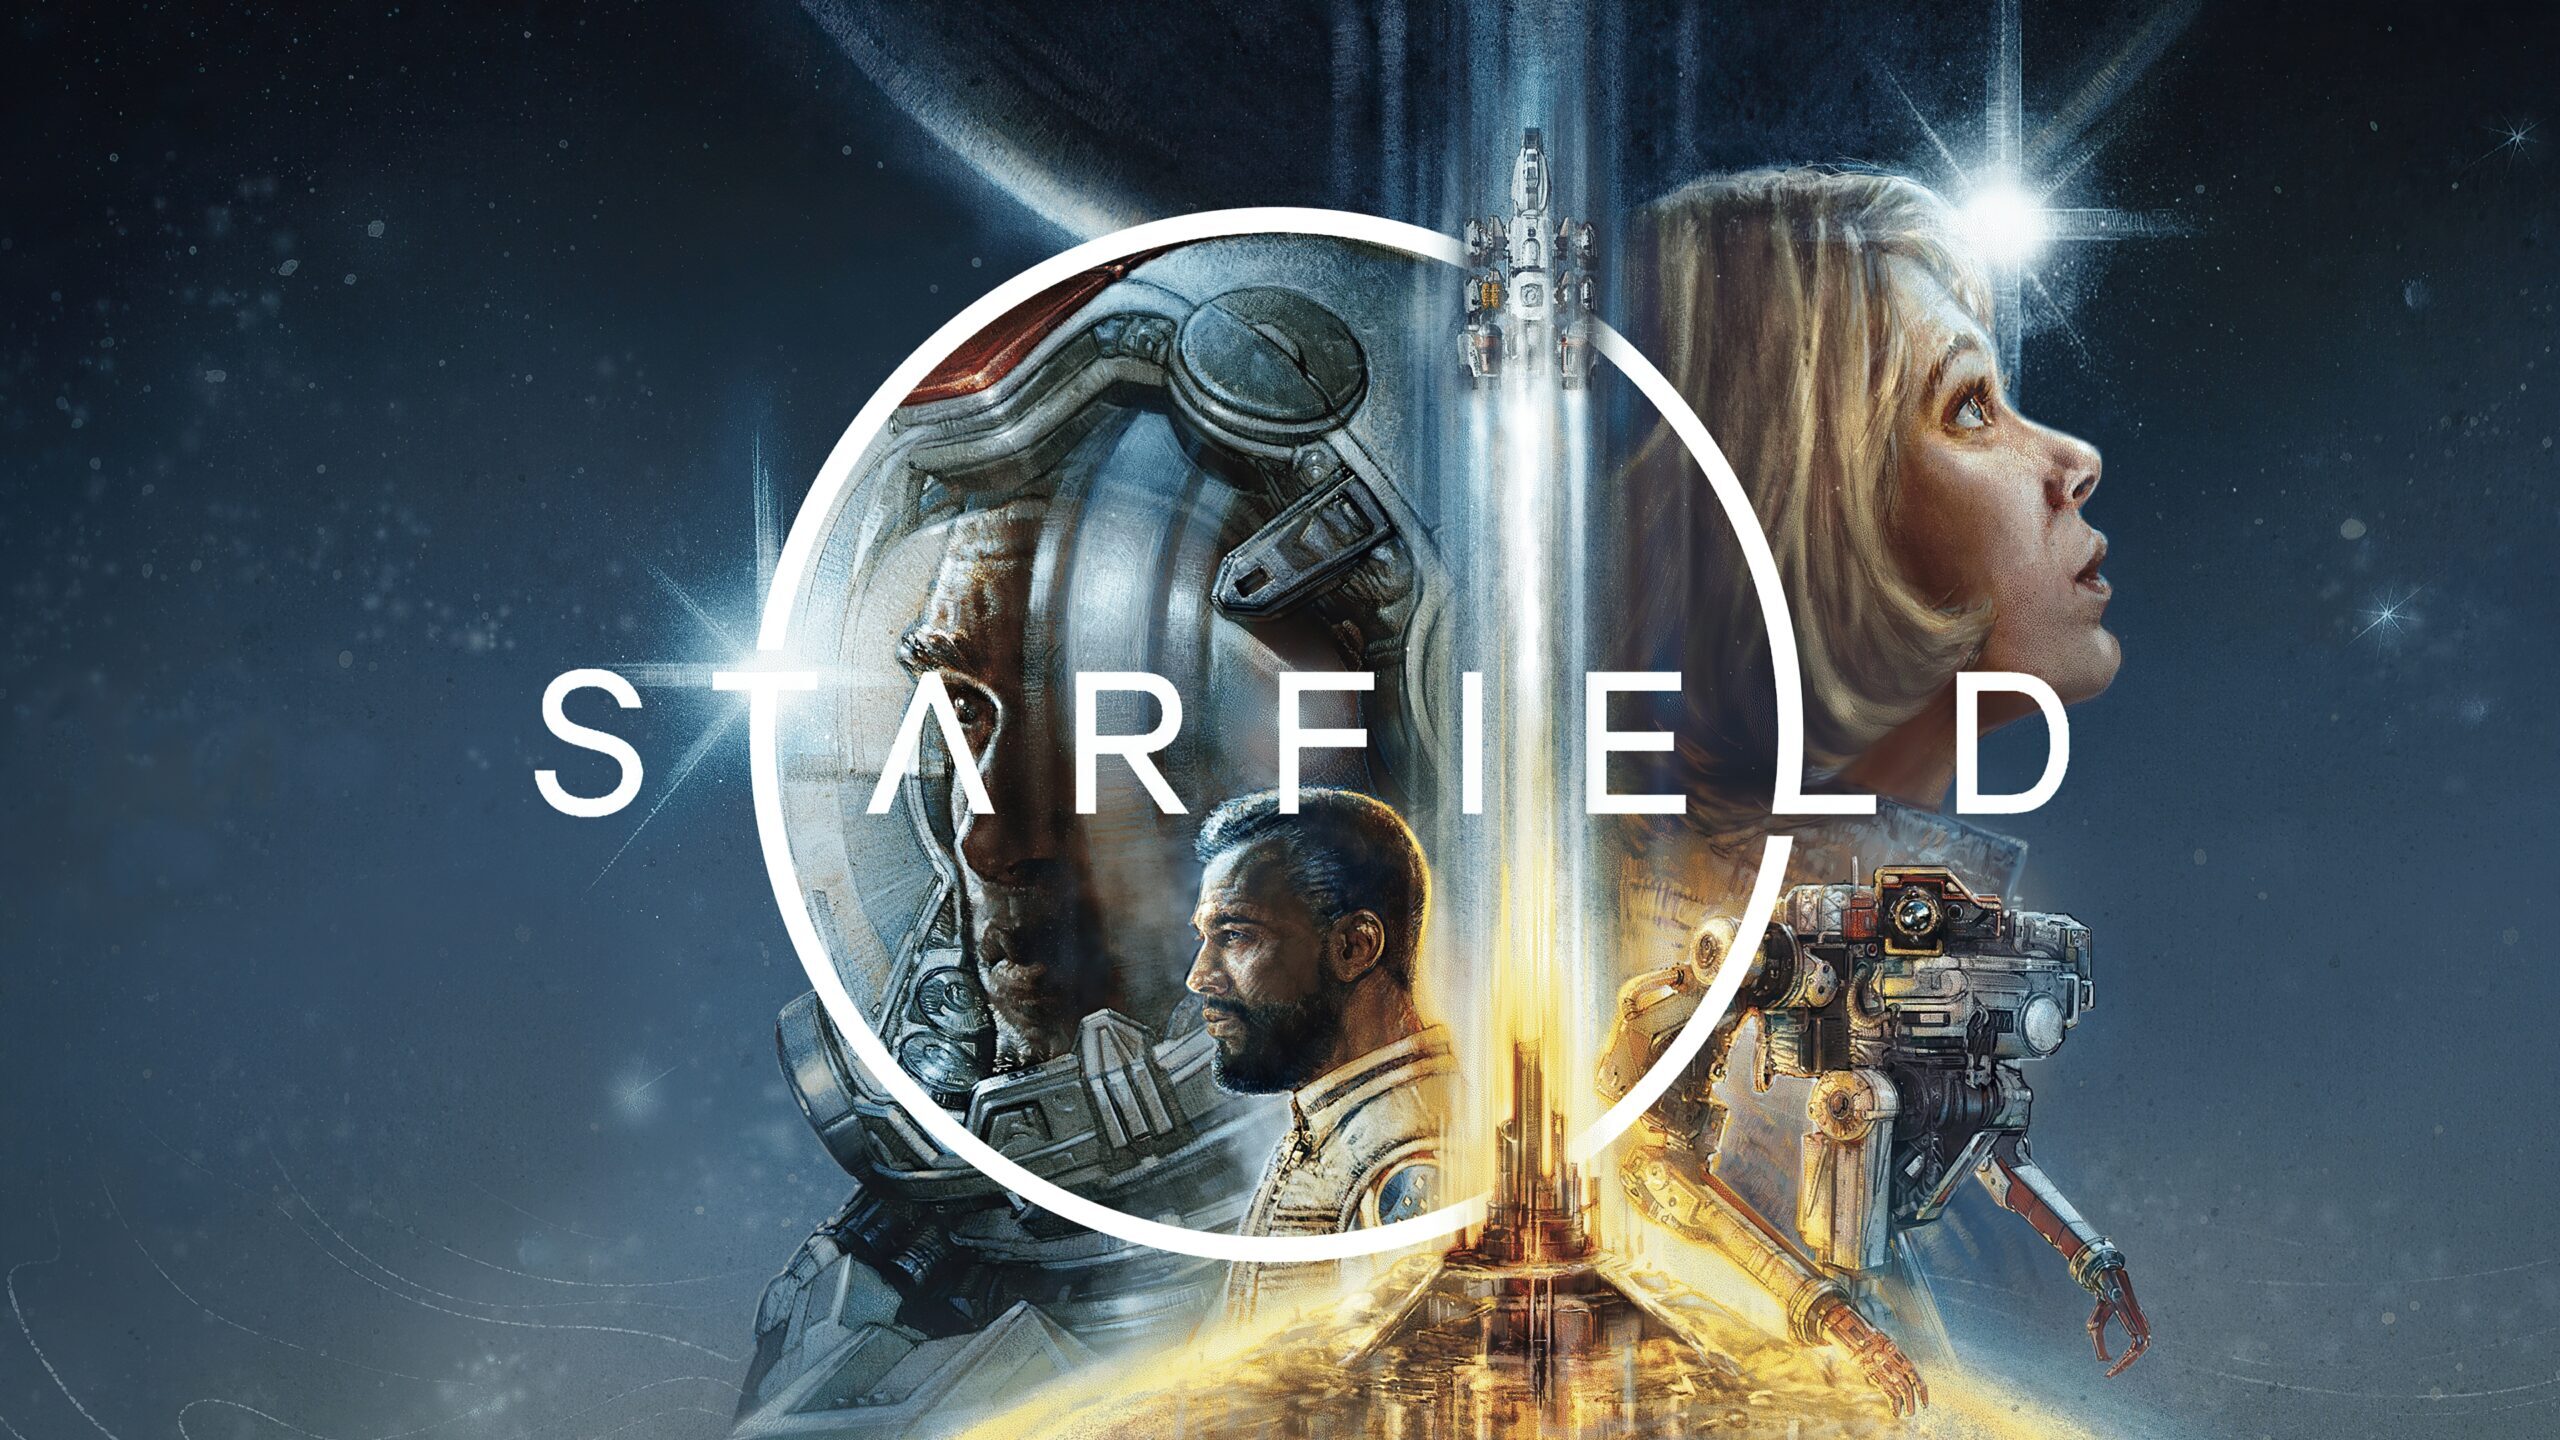 Starfield NVIDIA DLSS 3 Mod Drops During Early Access Says Modder